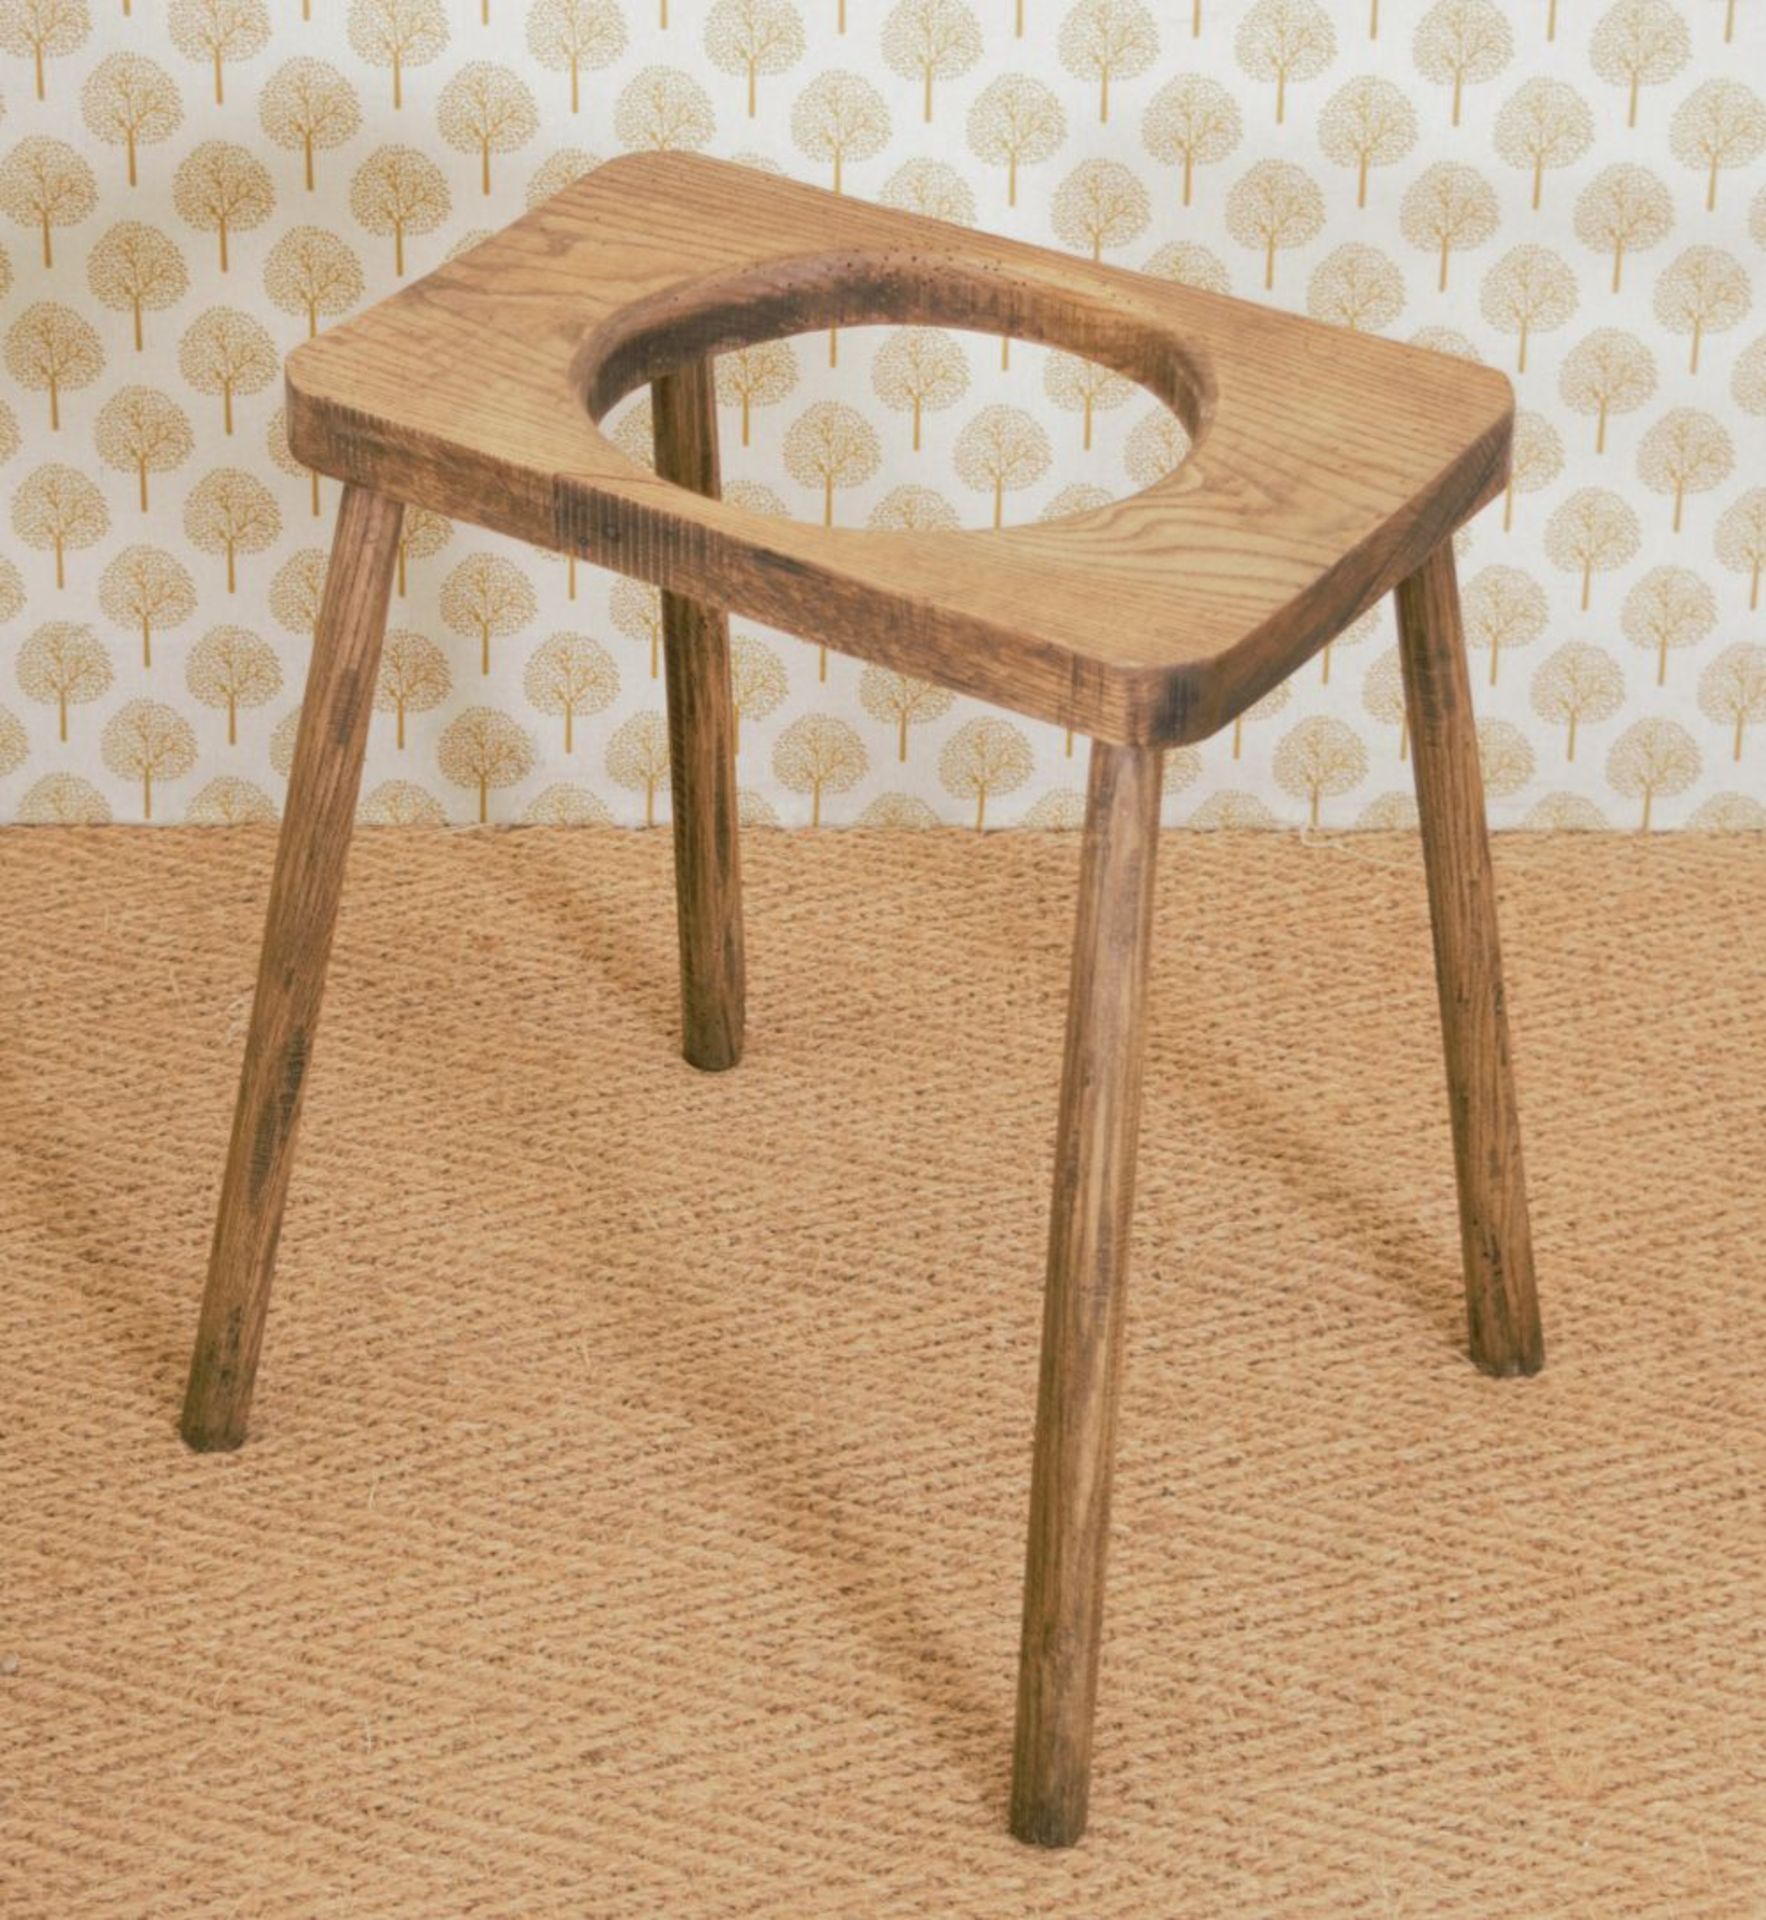 19TH-CENTURY BLOOD LETTING STOOL - Image 2 of 3